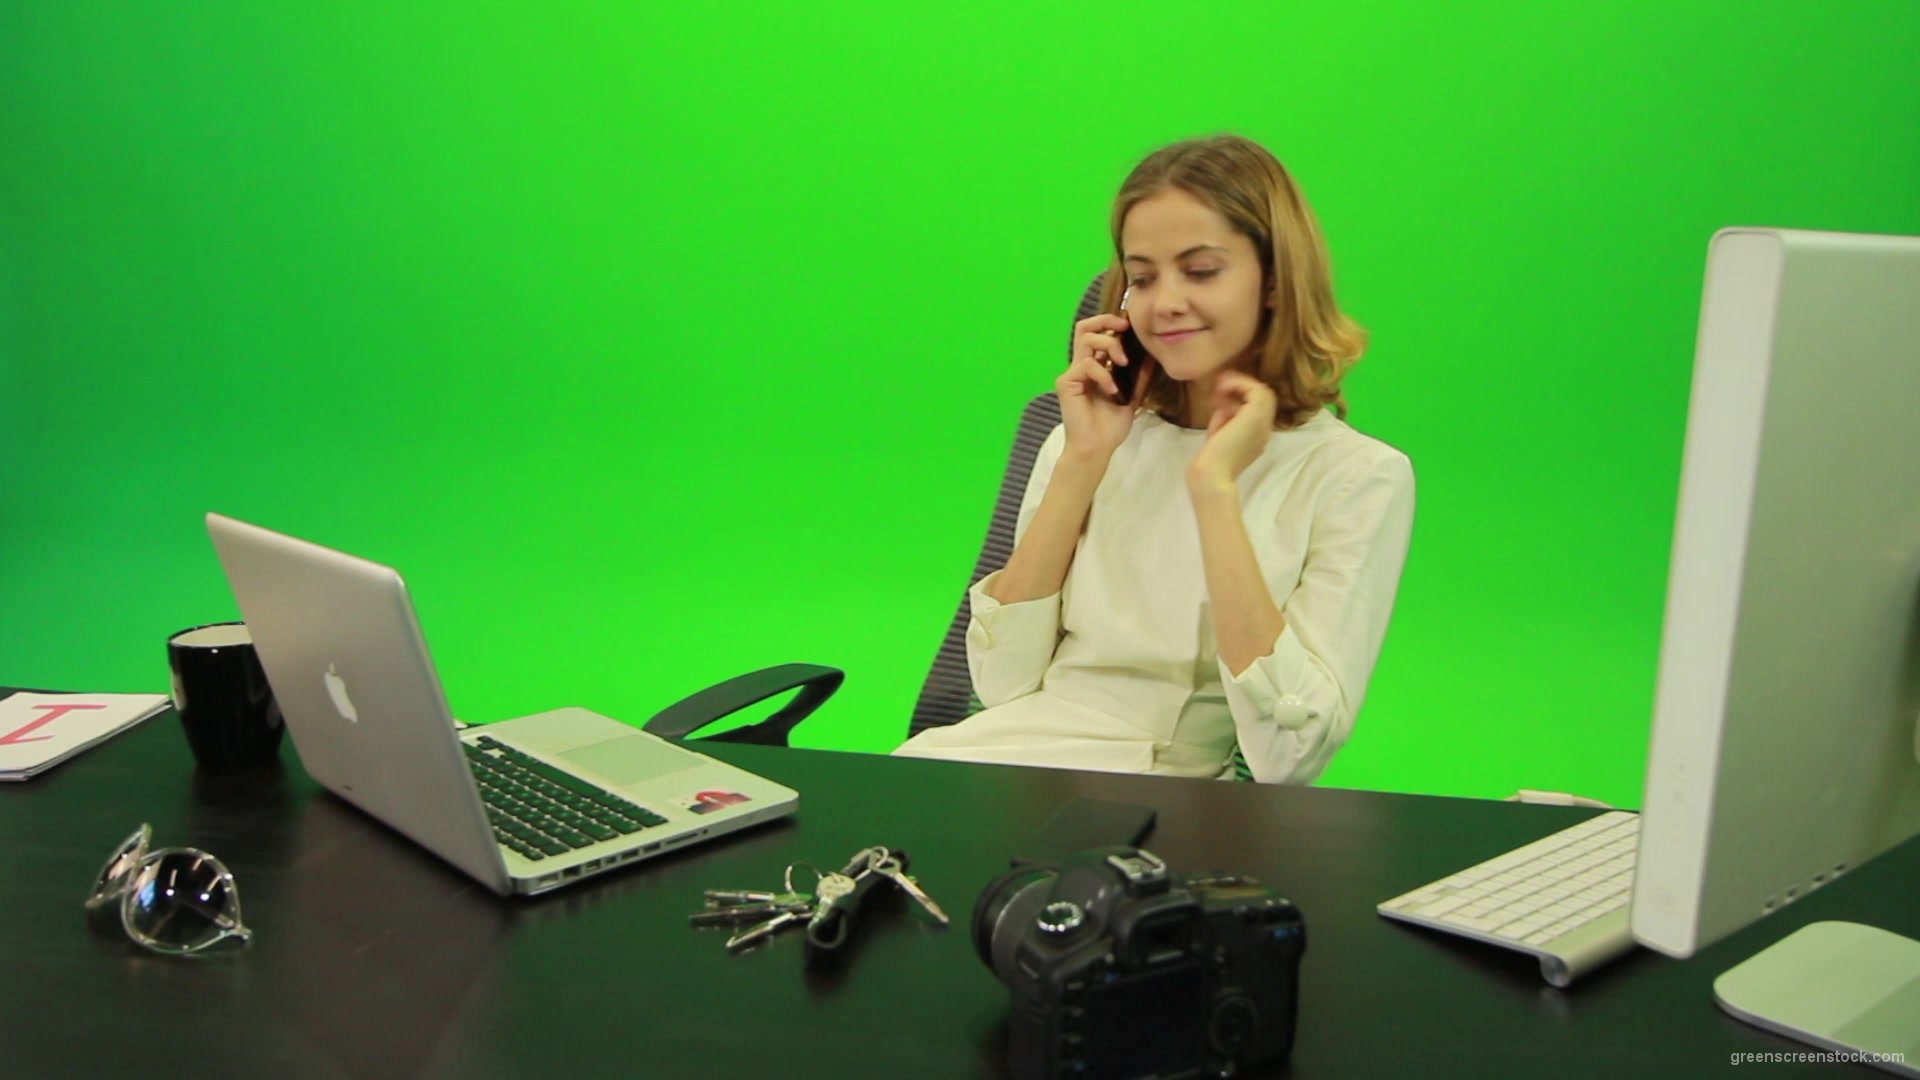 Laughing-Business-Woman-is-Talking-on-the-Phone-Green-Screen-Footage_007 Green Screen Stock